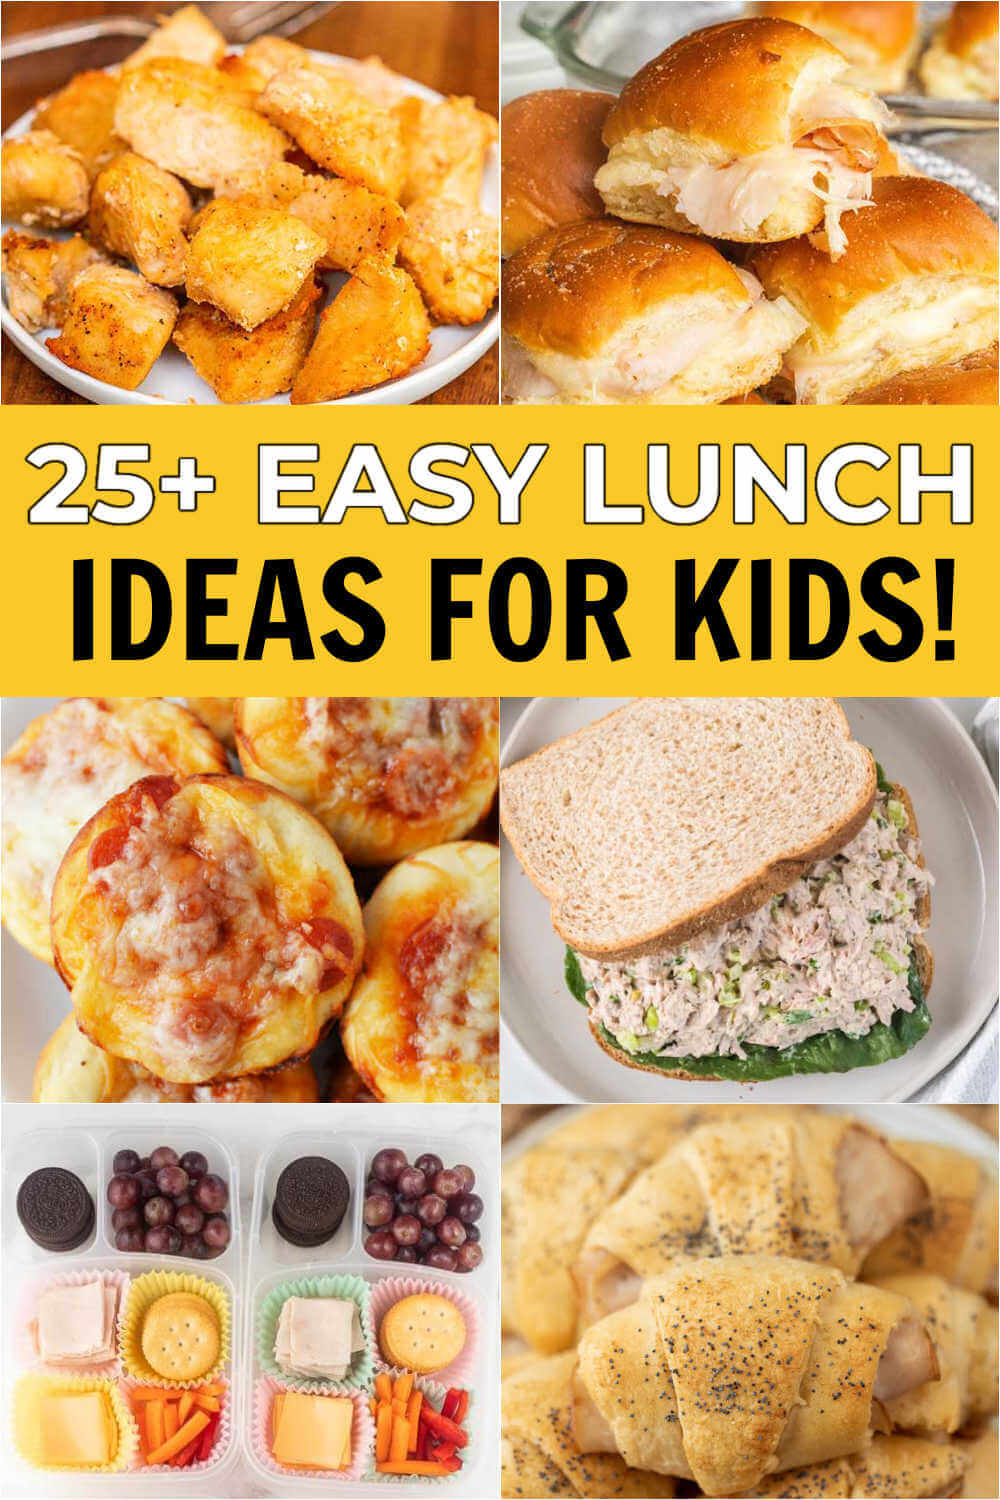 Easy Lunch Recipes For Beginners At Home - Best Design Idea